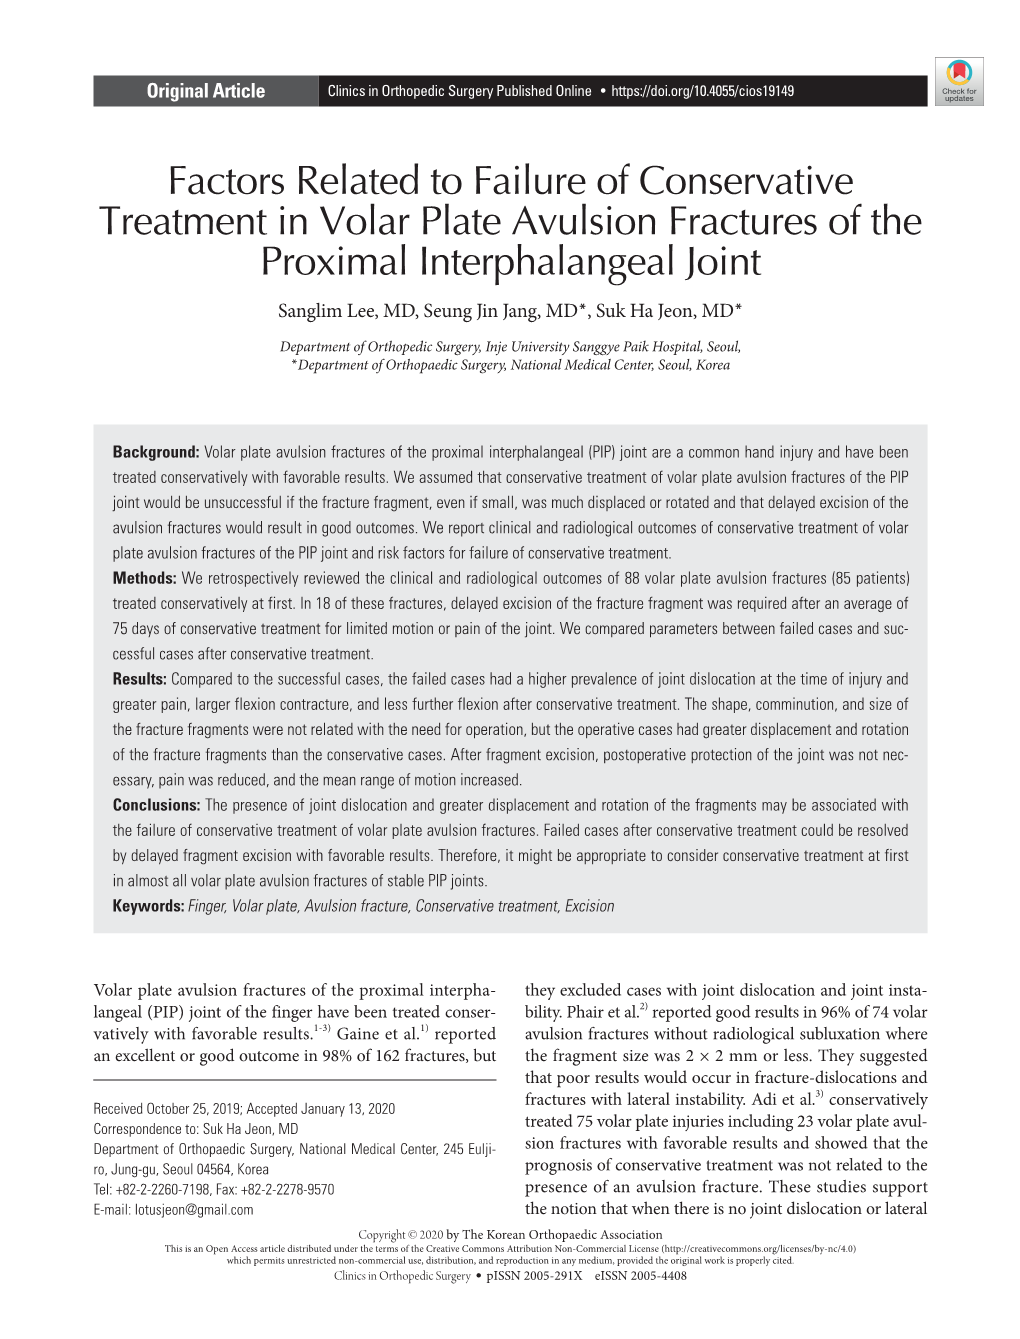 Factors Related to Failure of Conservative Treatment in Volar